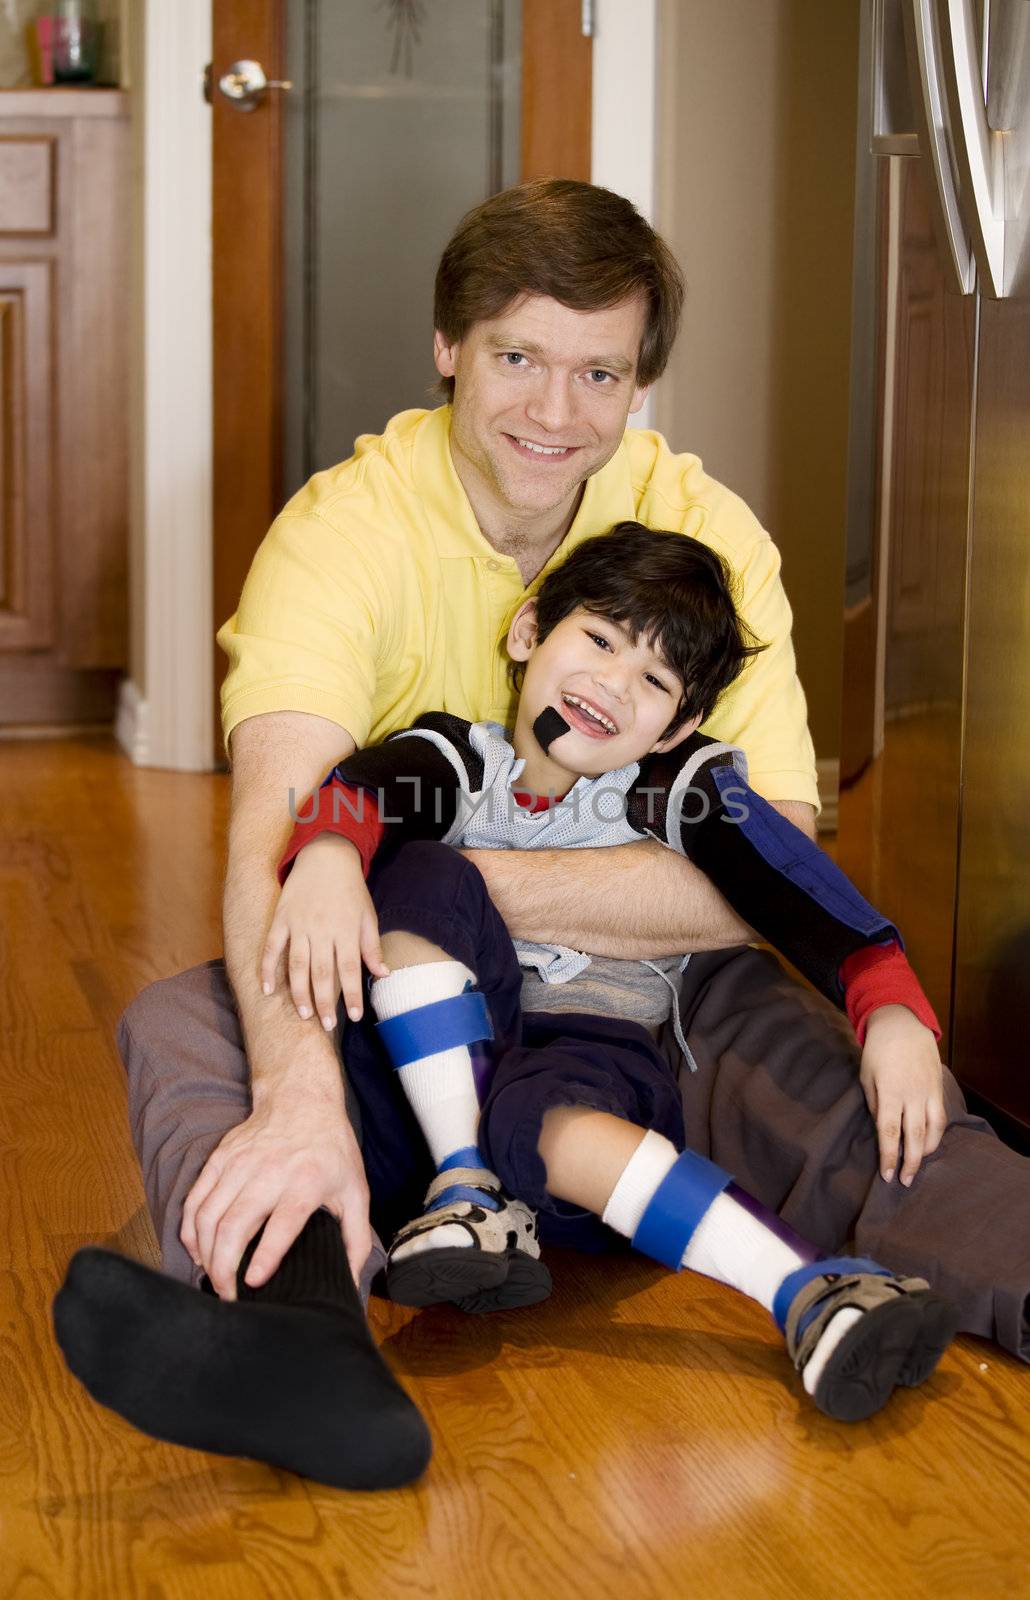 Father holding disabled son on kitchen floor. Son has cerebral palsy.